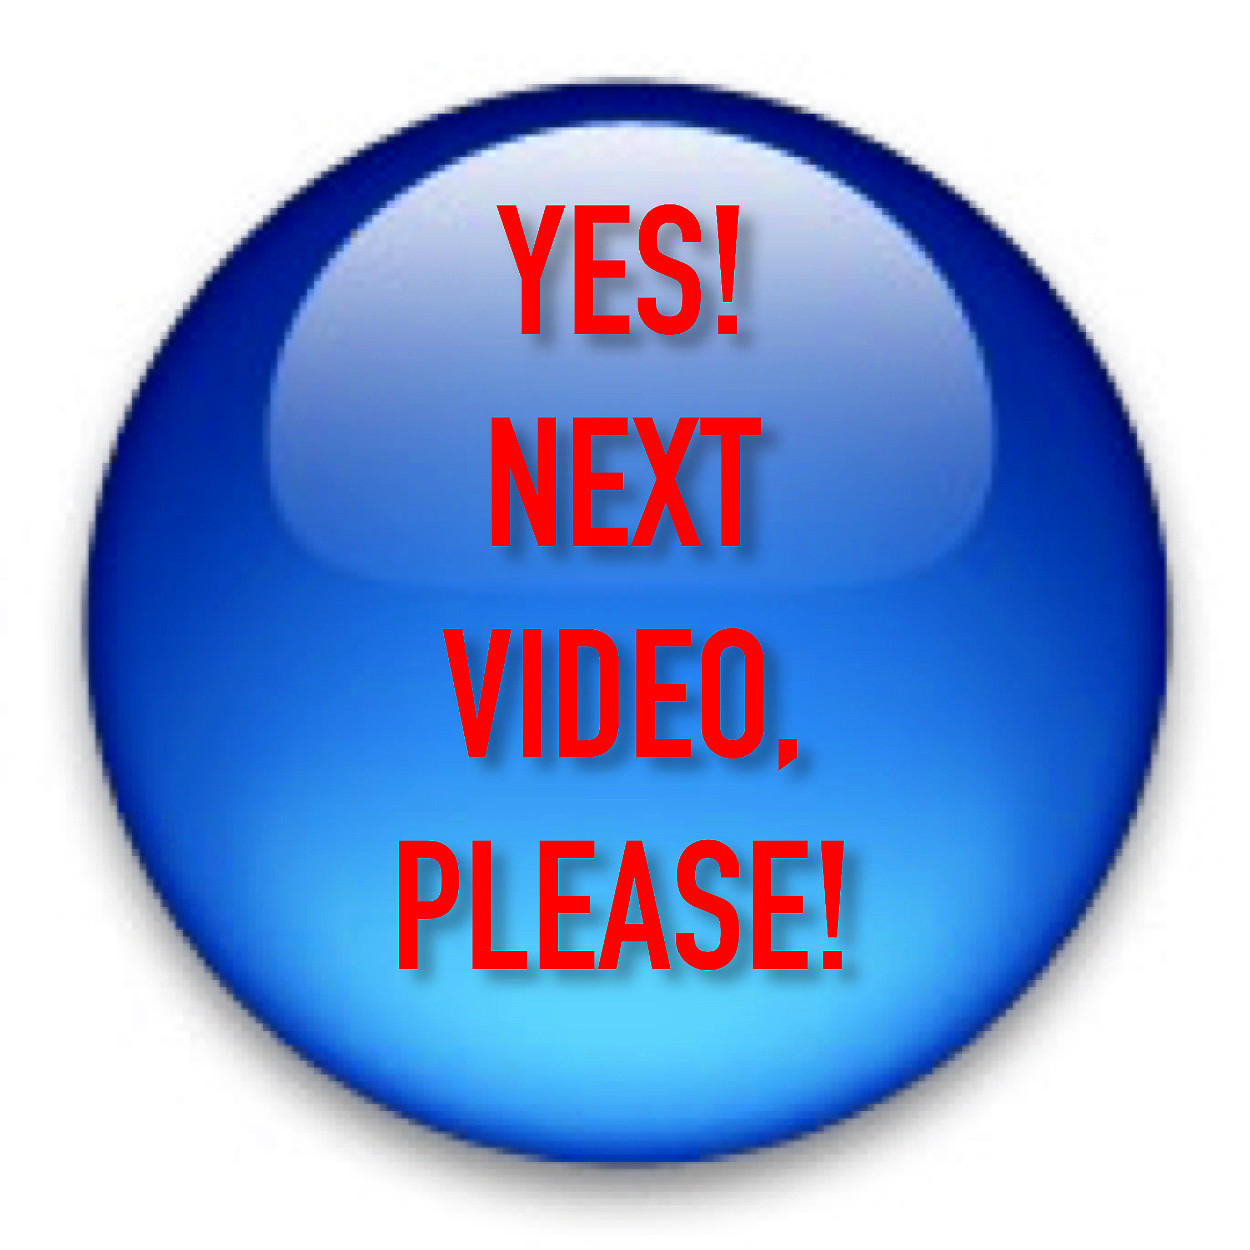 Yes! Next Video button #2